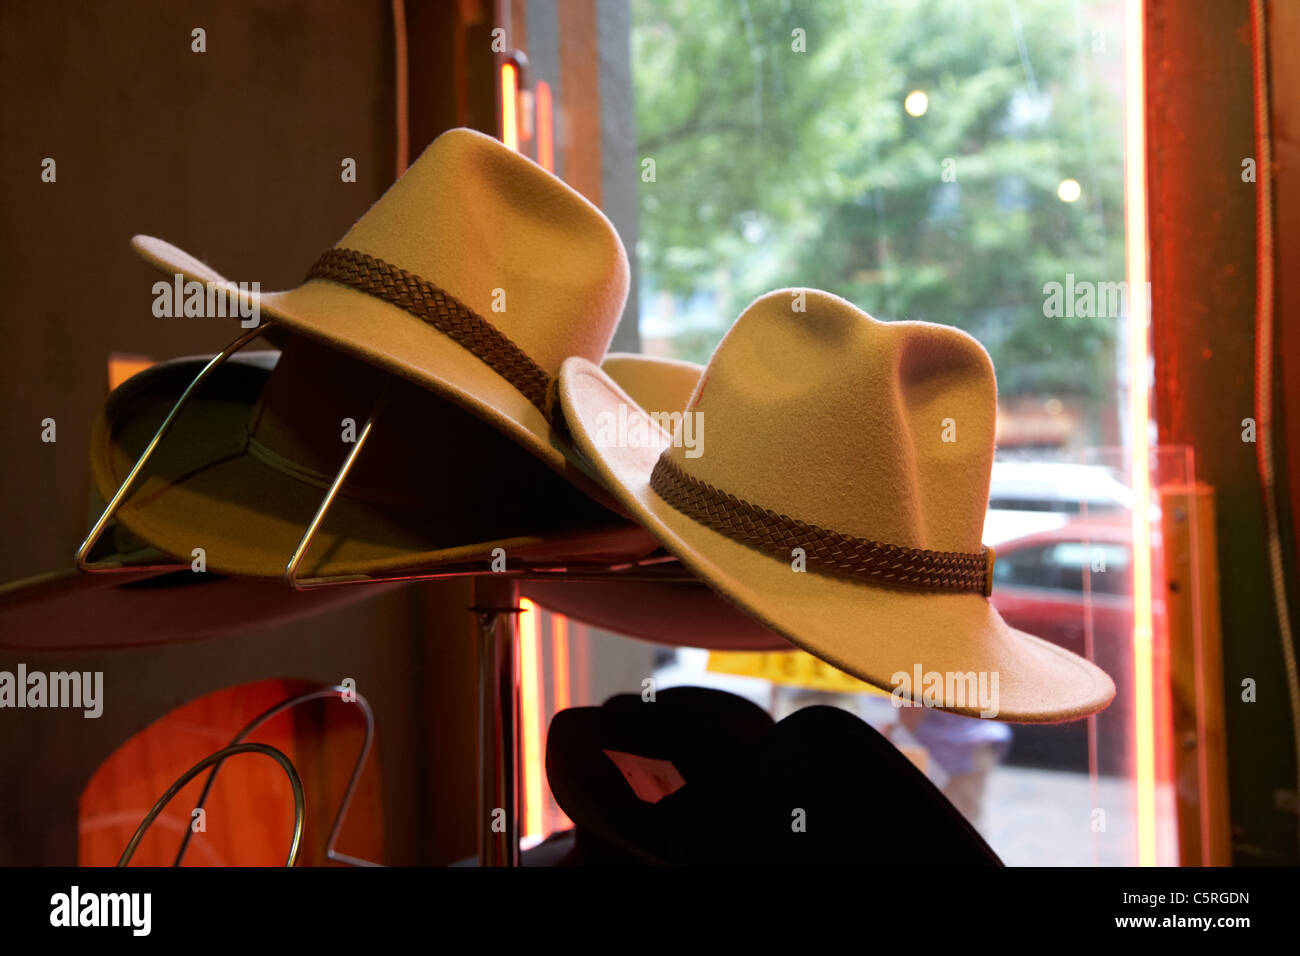 Cowboy Hats In Store In Banque d'image et photos - Alamy